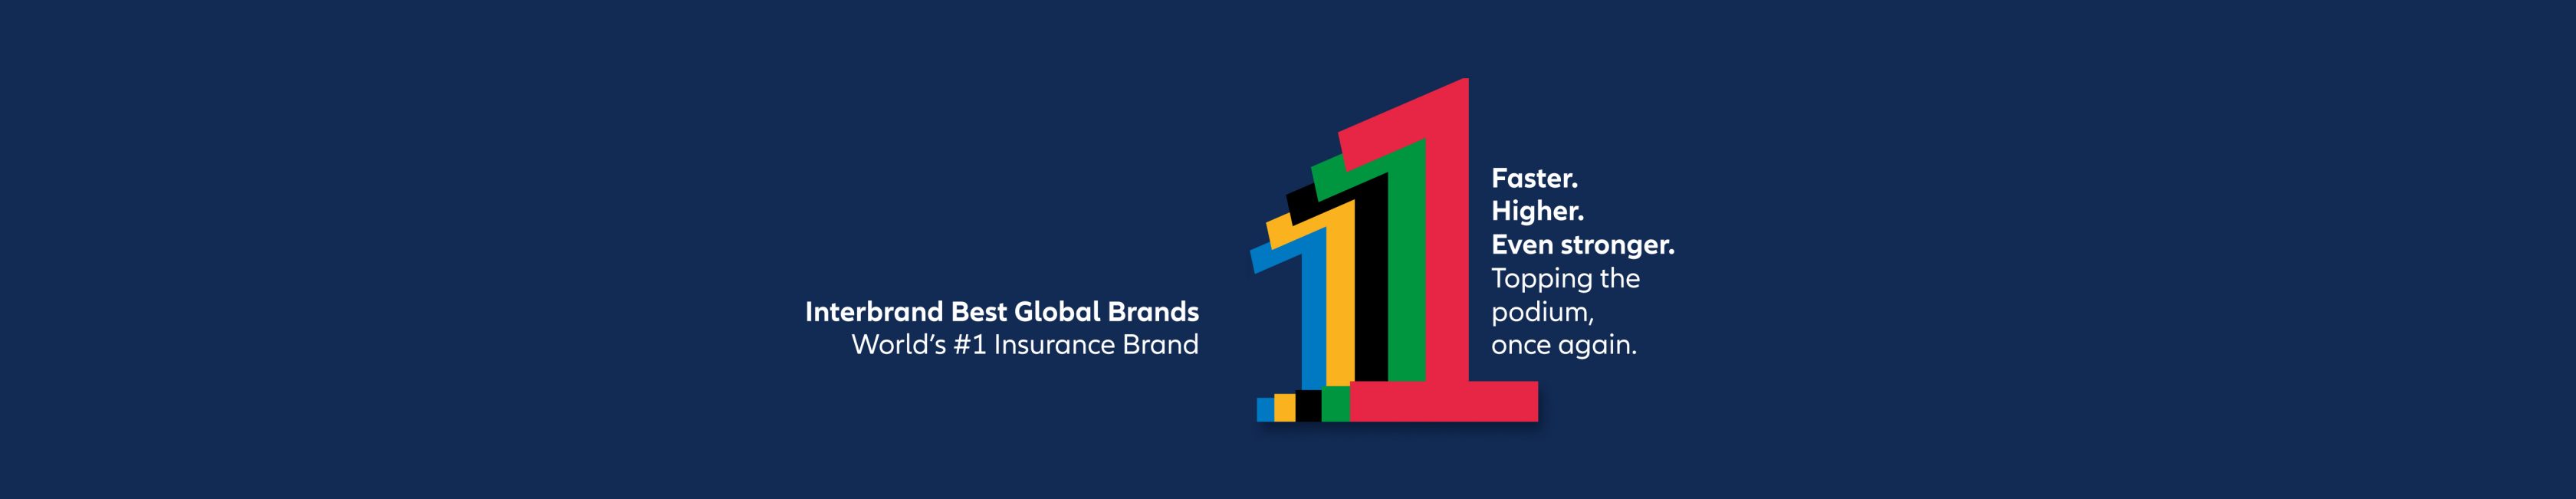 Superimposed colorful graphics consisting of typographic ones with the headline " Interbrand Best Global Brands. World's #1 Insurance Brand.Faster. Higher. Even stronger. Topping the podium, once again." 